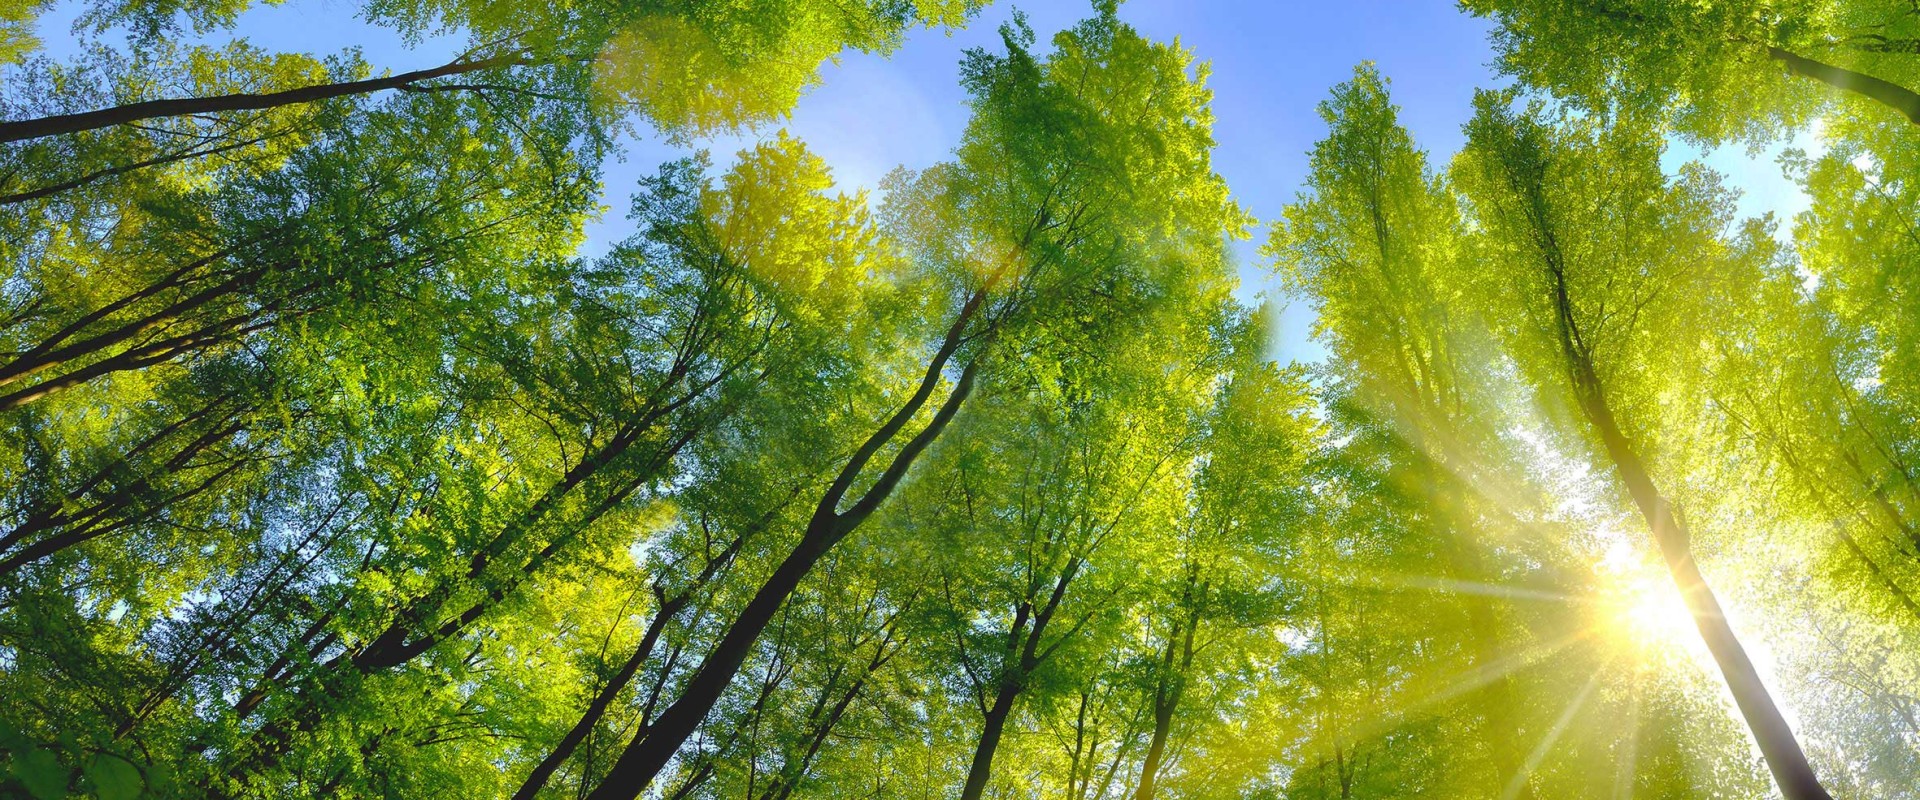  Deciduous forest with green leaves in sun light and blue sky above